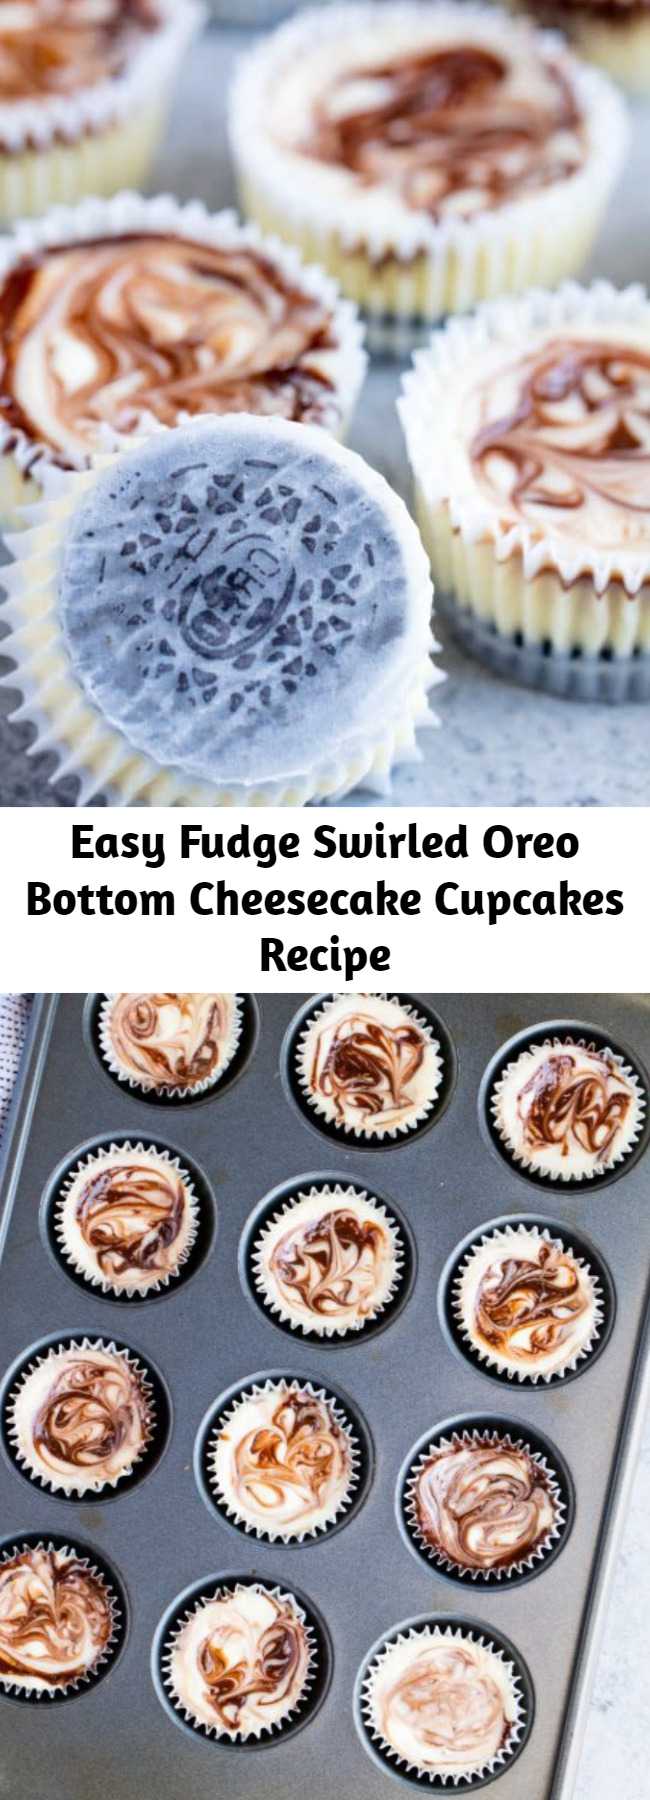 Easy Fudge Swirled Oreo Bottom Cheesecake Cupcakes Recipe - Fudge Swirled Oreo Bottom Cheesecake Cupcakes are a delicious twist on your standard cupcake. It's a fudge swirled mini cheesecake that sits on top of an Oreo cookie. What's not to love? #cheesecake #oreo